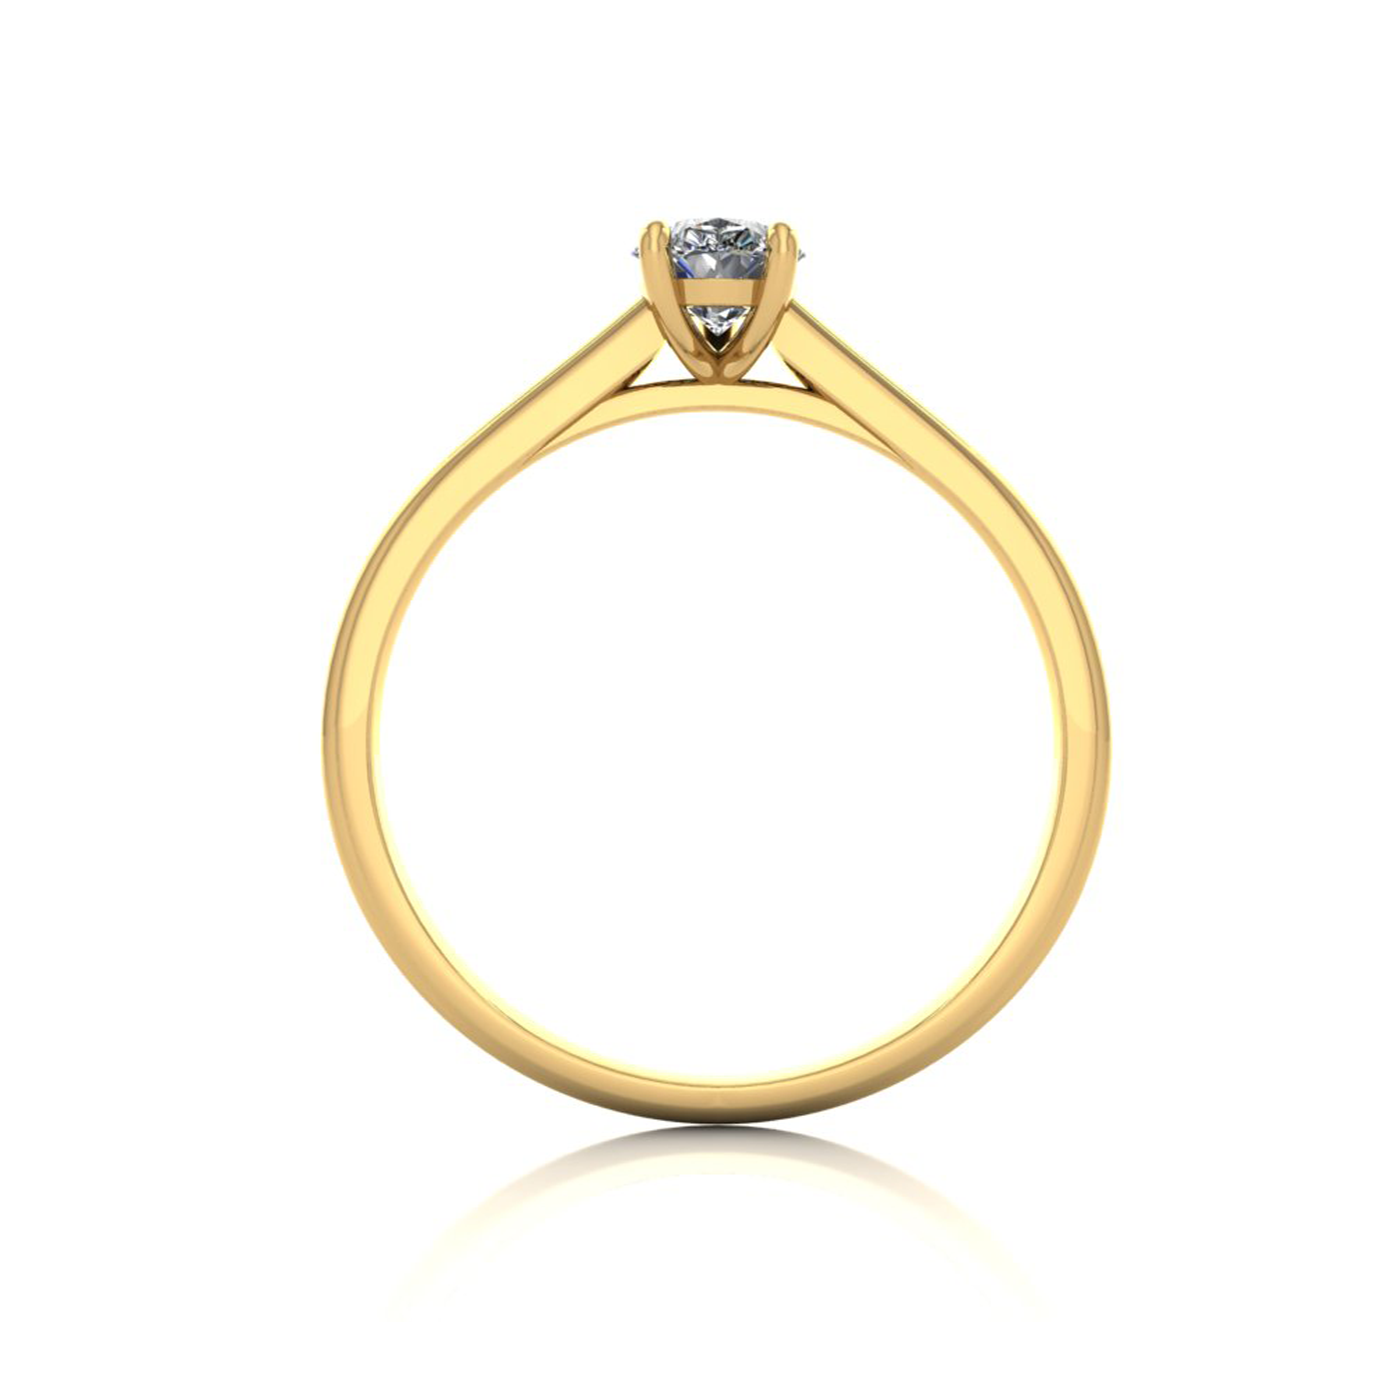 18k yellow gold  0,50 ct 3 prongs solitaire pear cut diamond engagement ring with whisper thin band